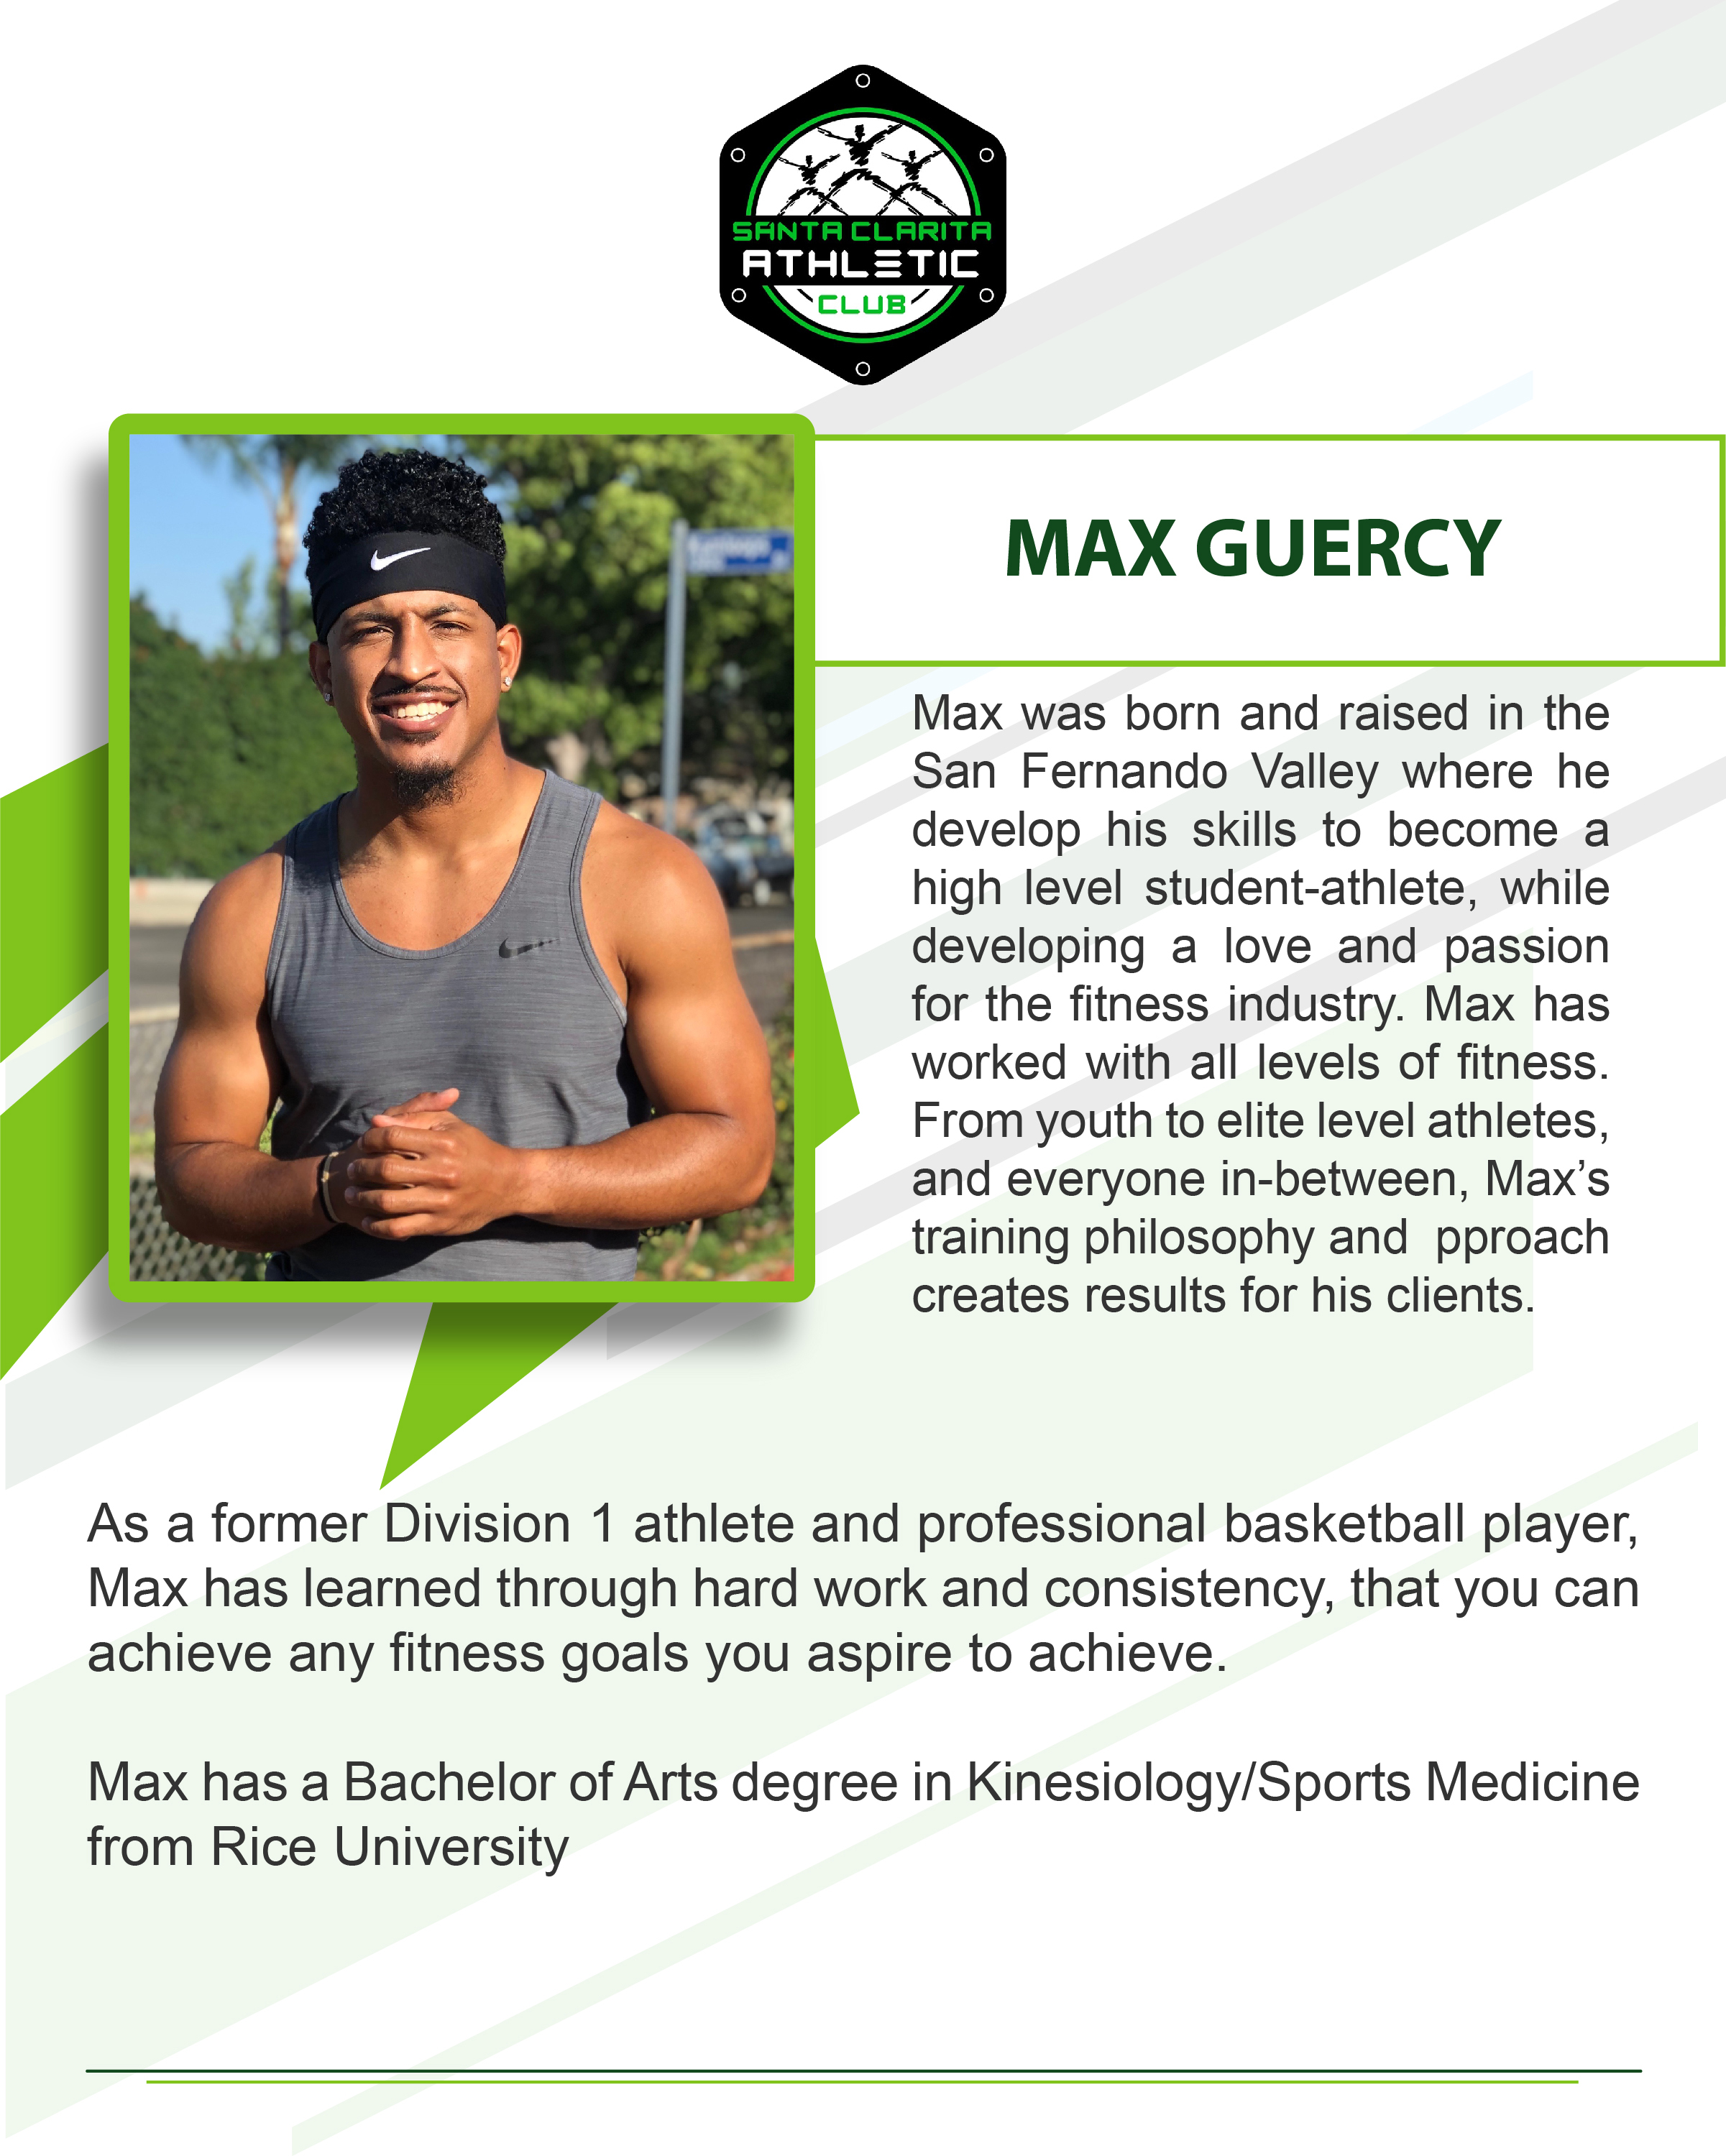 Max Guercy - Certified Personal Trainer